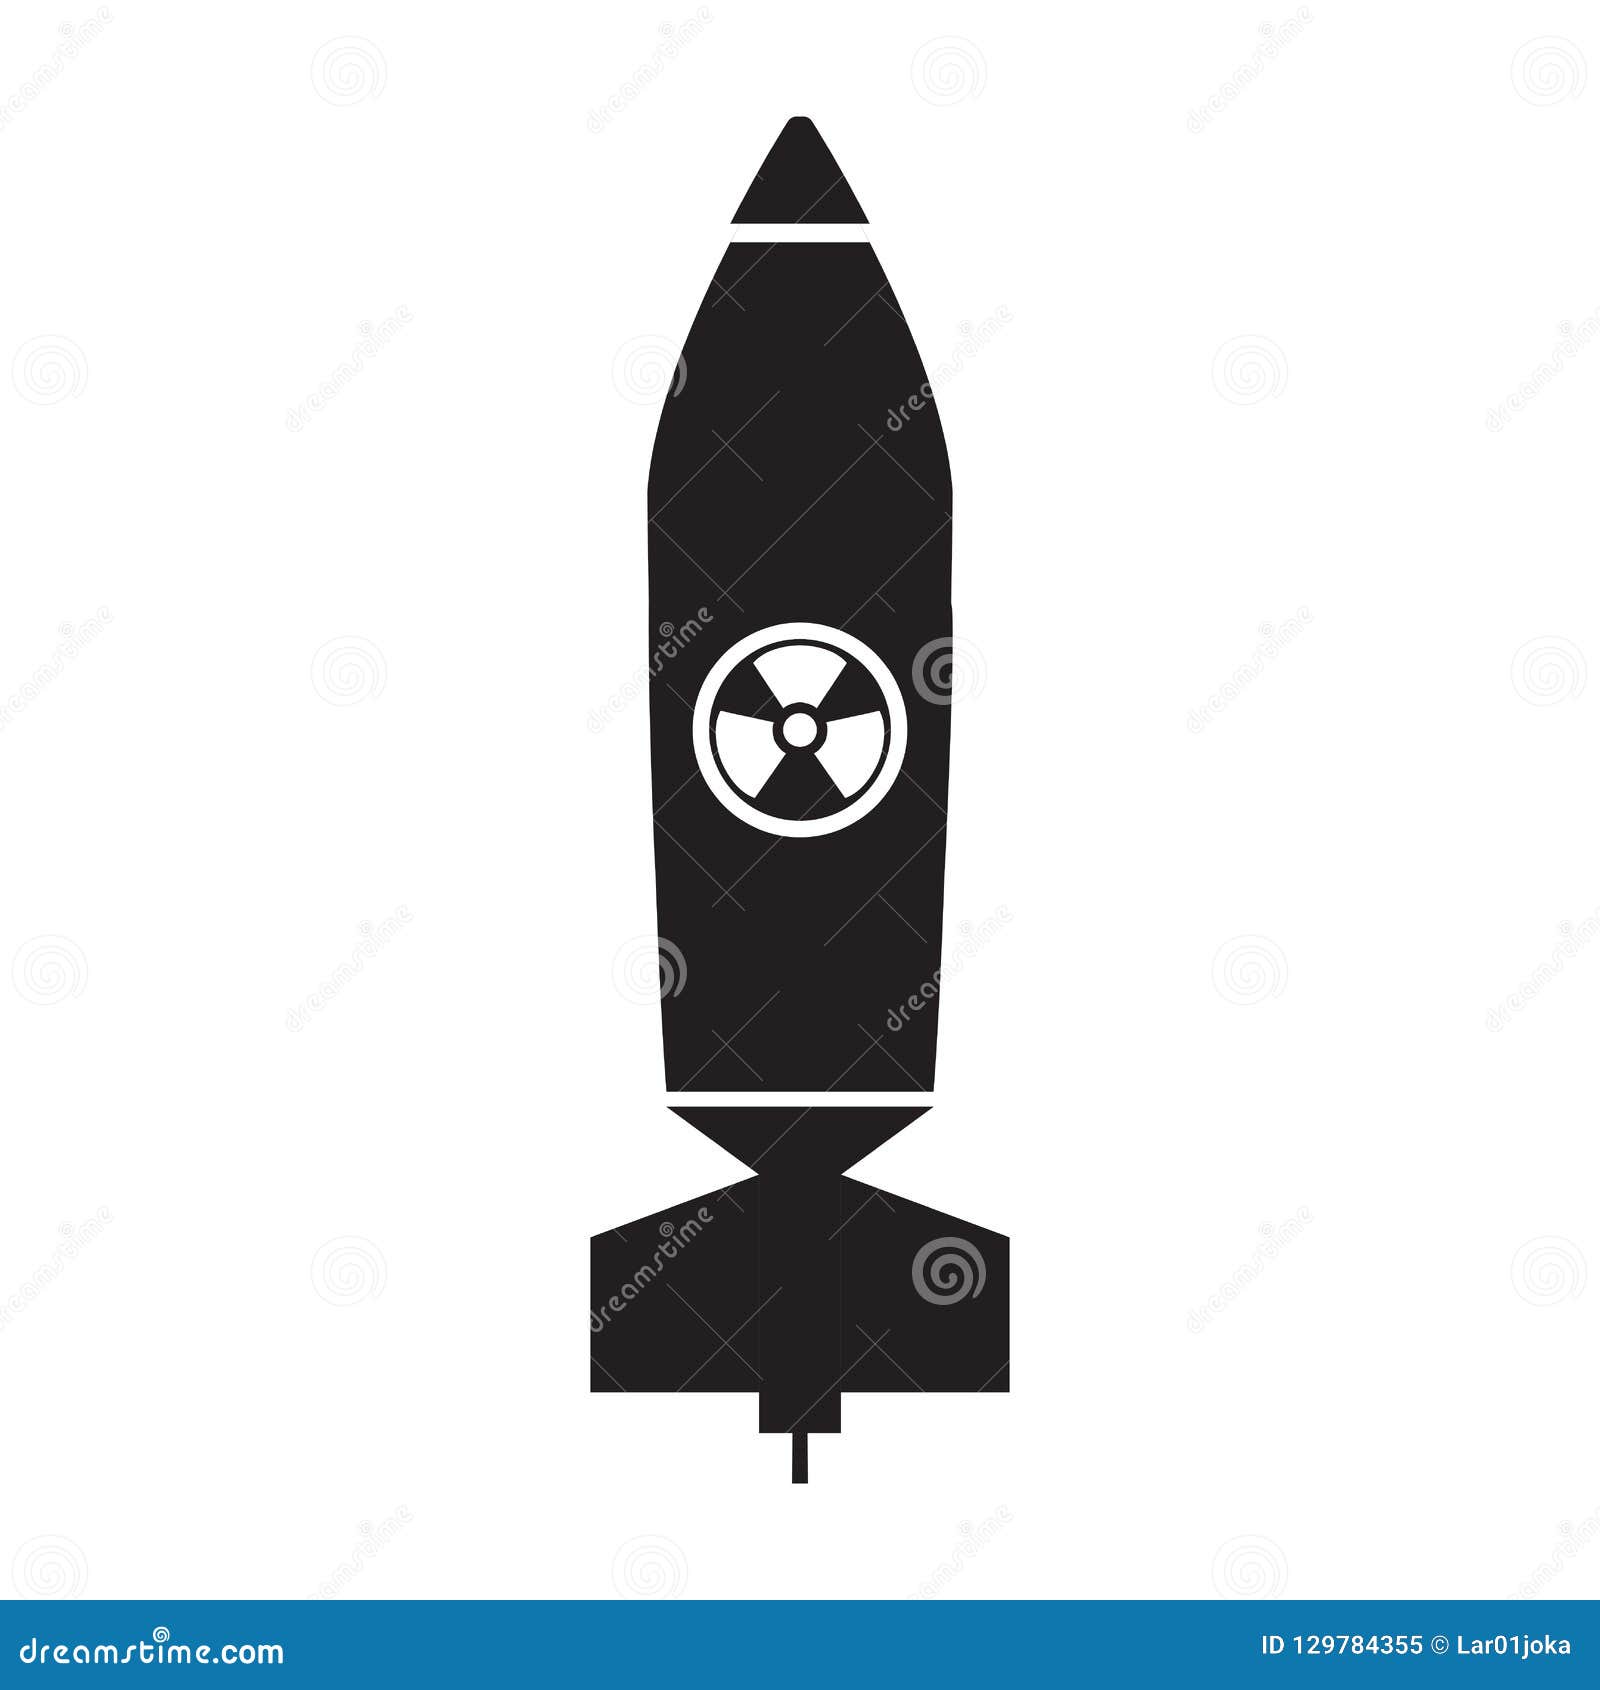  nuclear missile icon